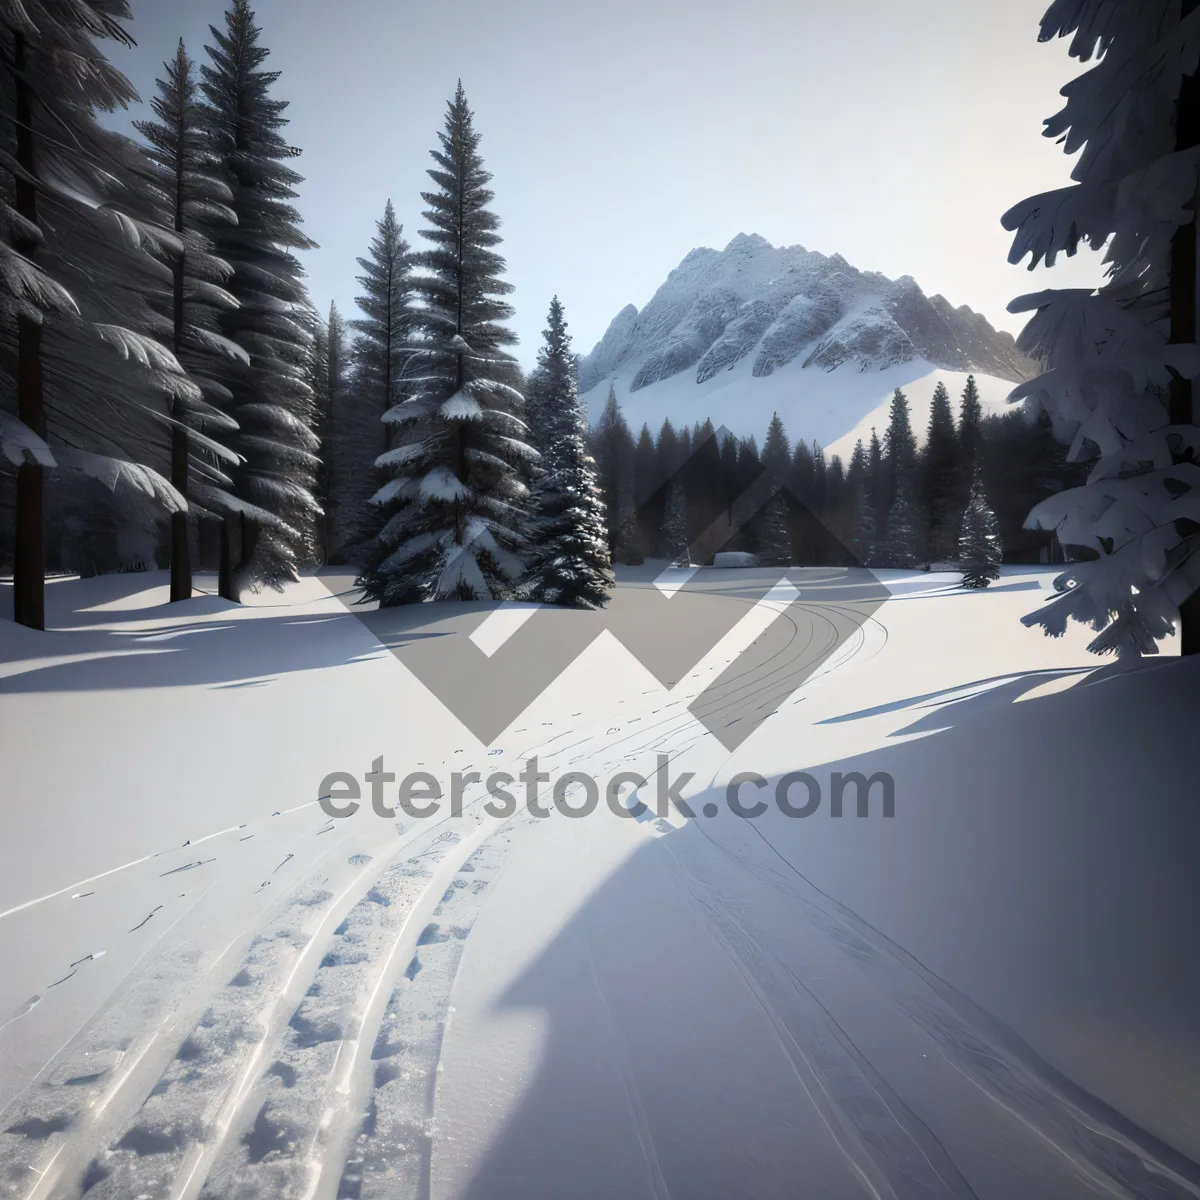 Picture of Snowy Alpine Ski Slope With Majestic Mountain Landscape